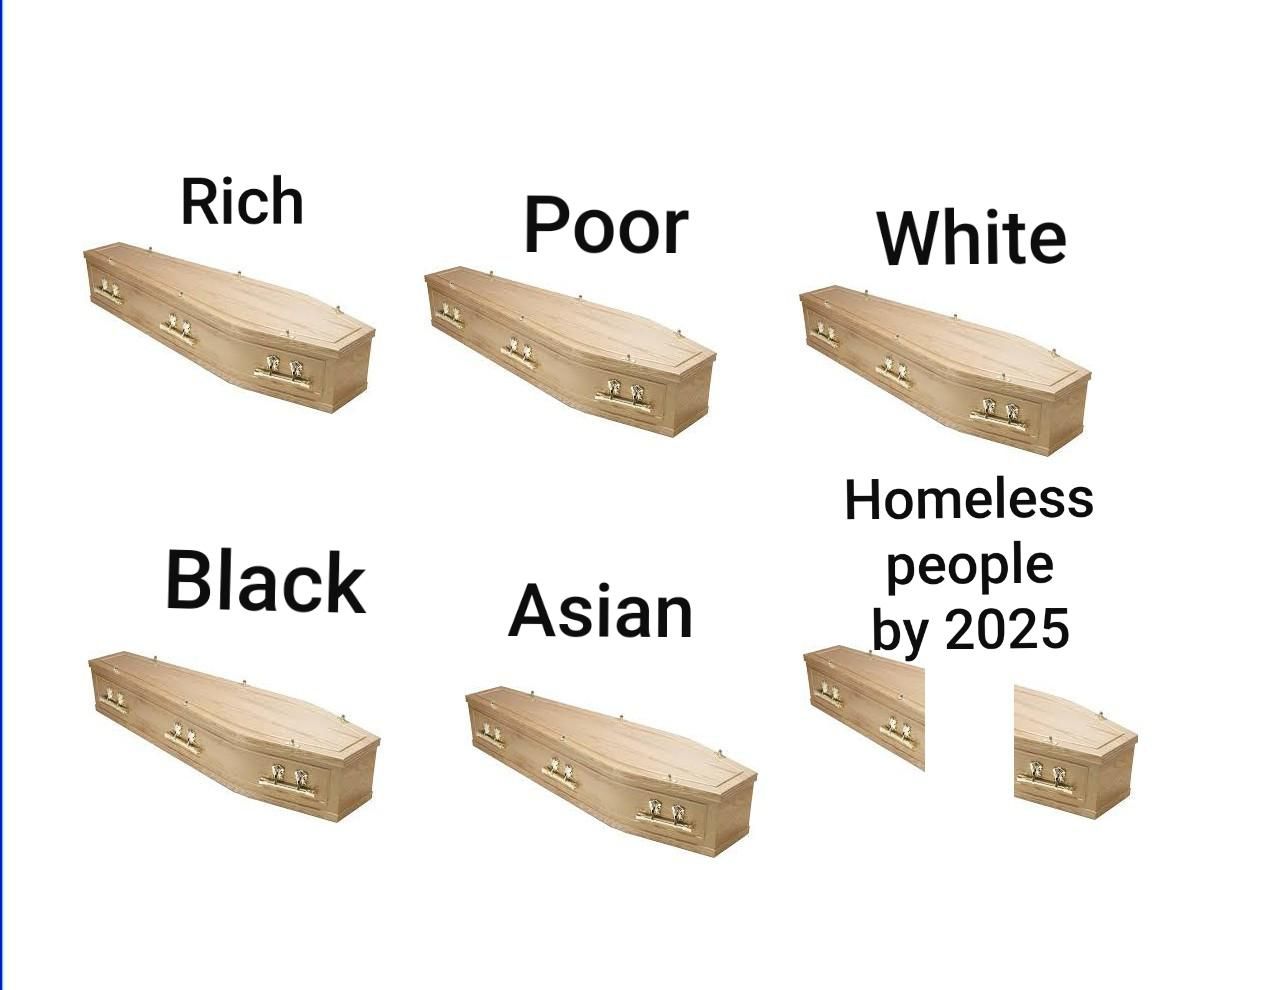 Homeless people by 2025